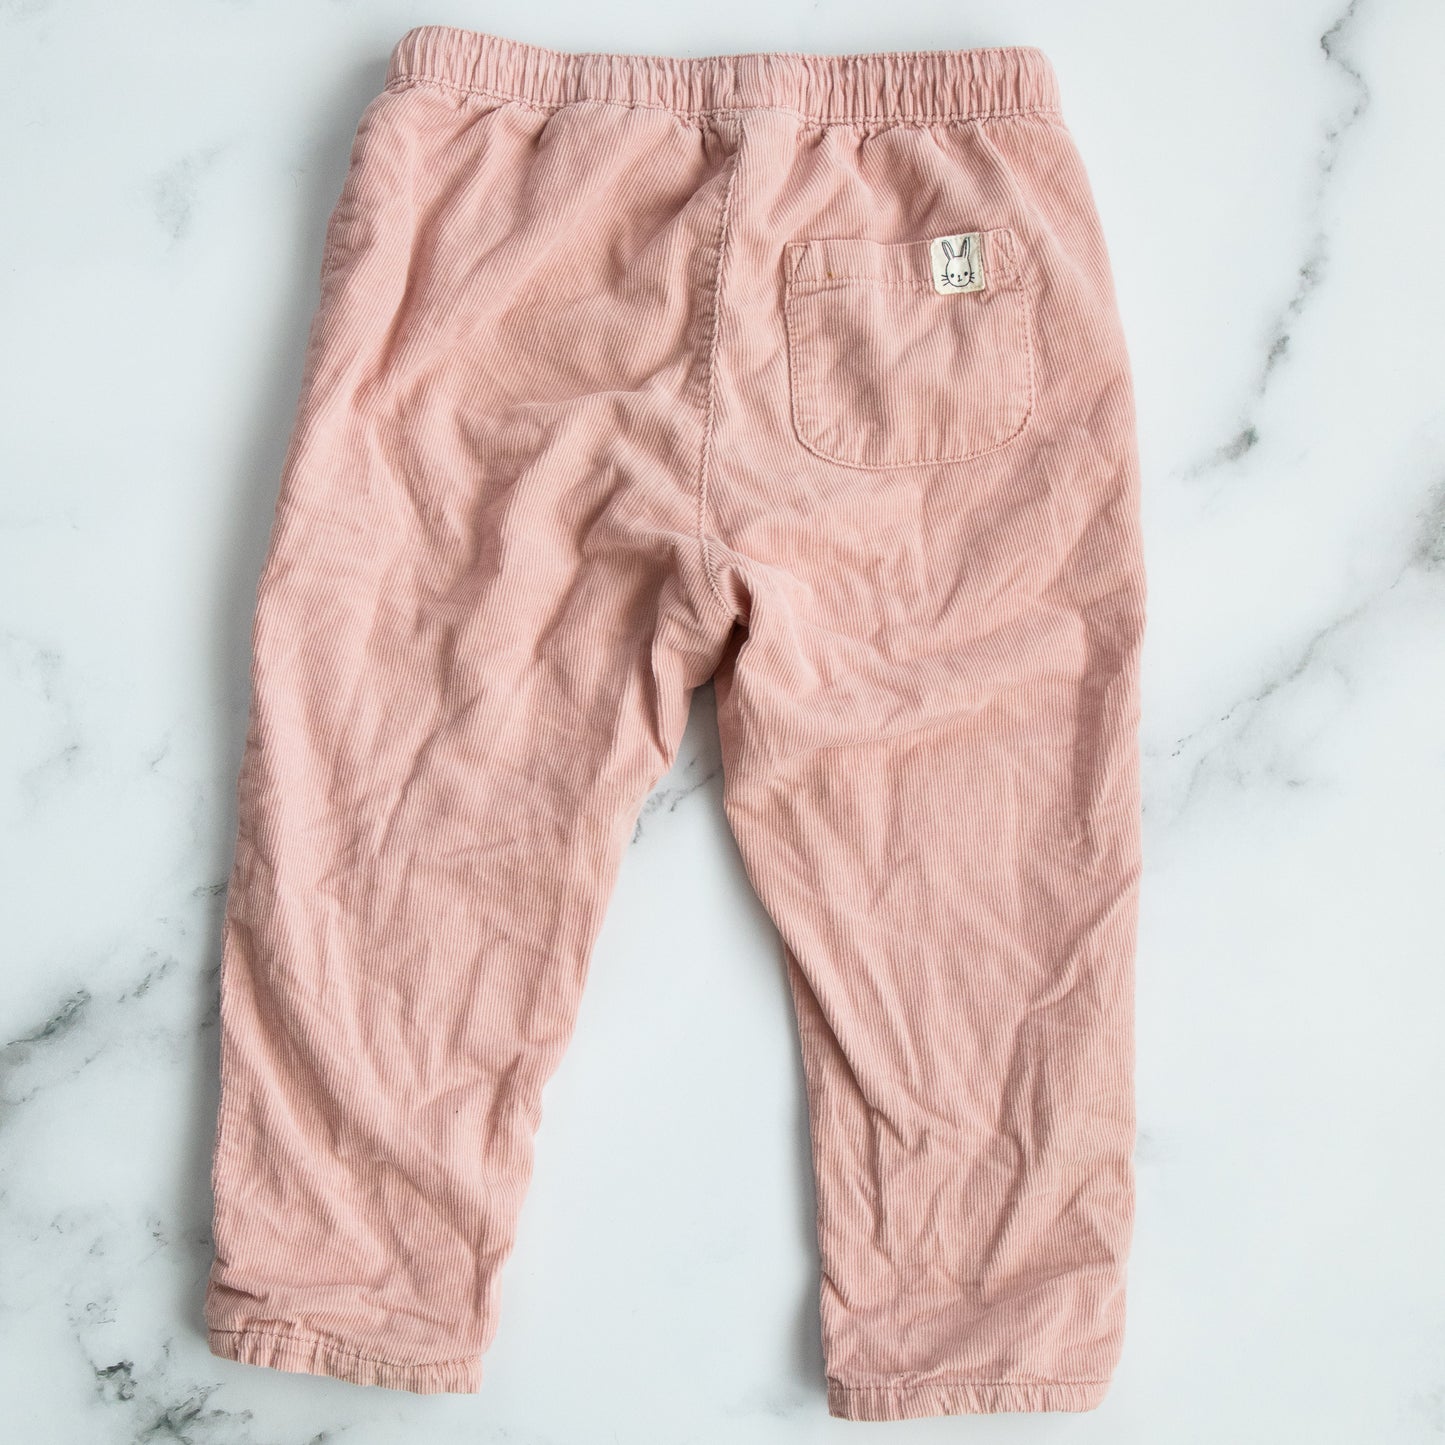 H&M Pink Suade Trousers (12-18M)